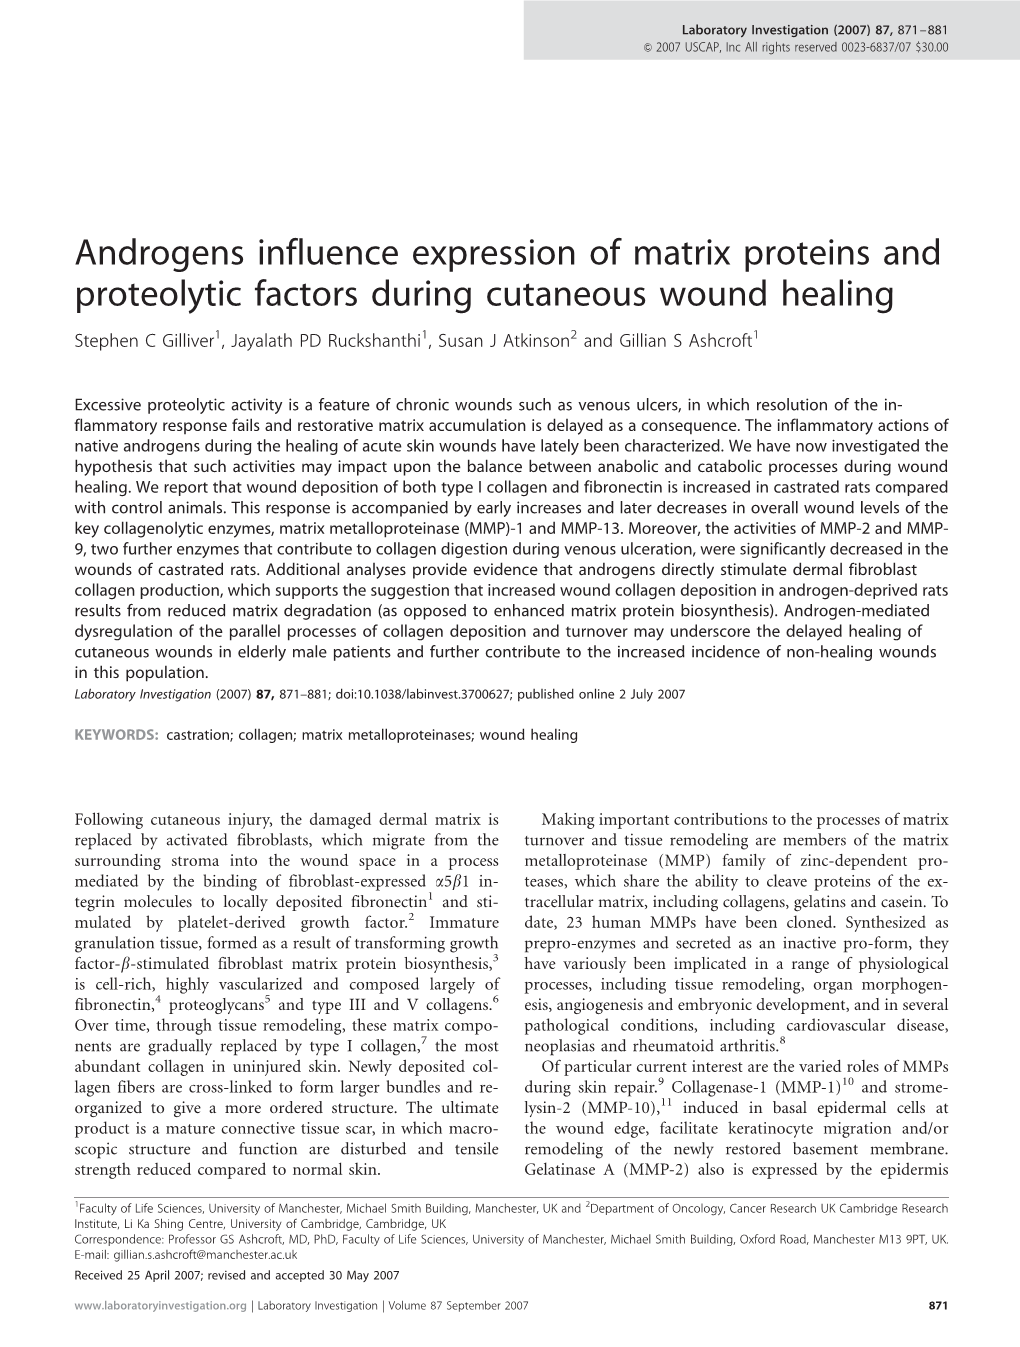 Androgens Influence Expression of Matrix Proteins and Proteolytic